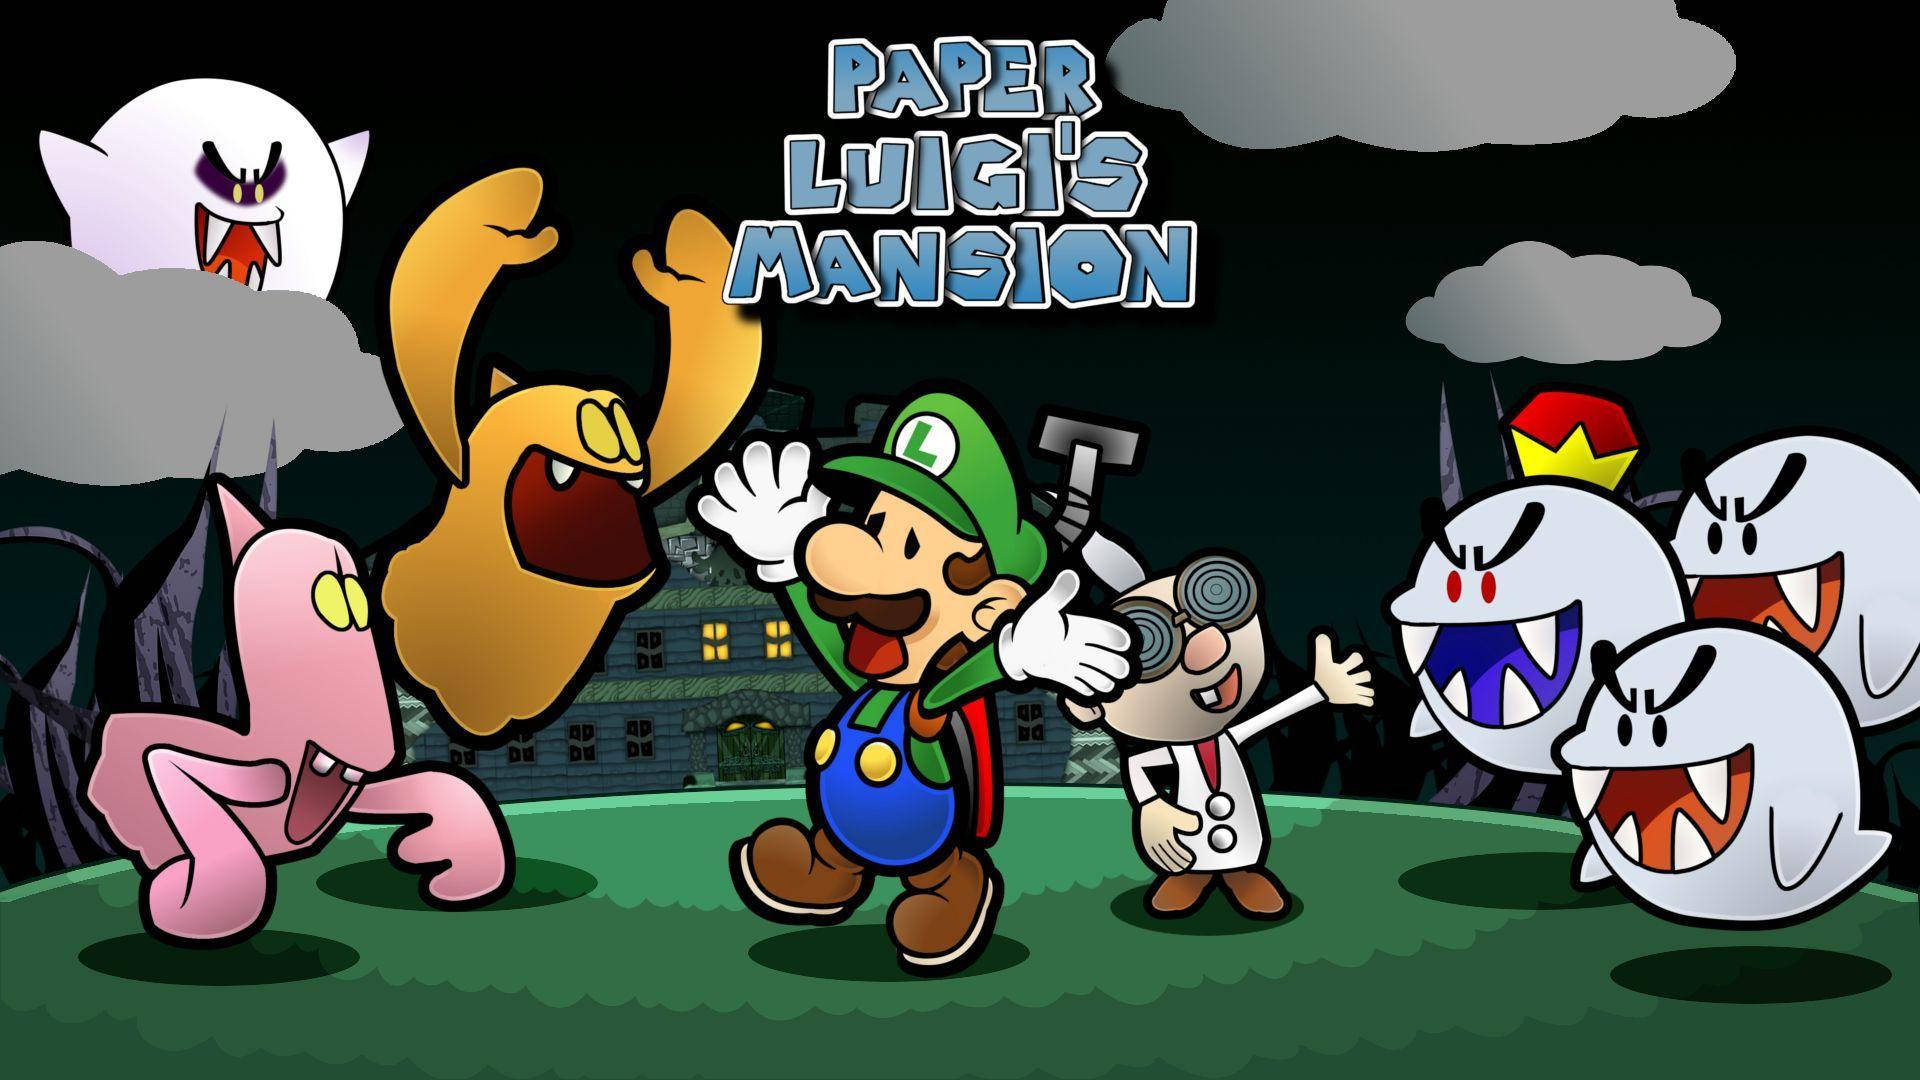 Luigi's Mansion 3 Characters In Paper Mario Style